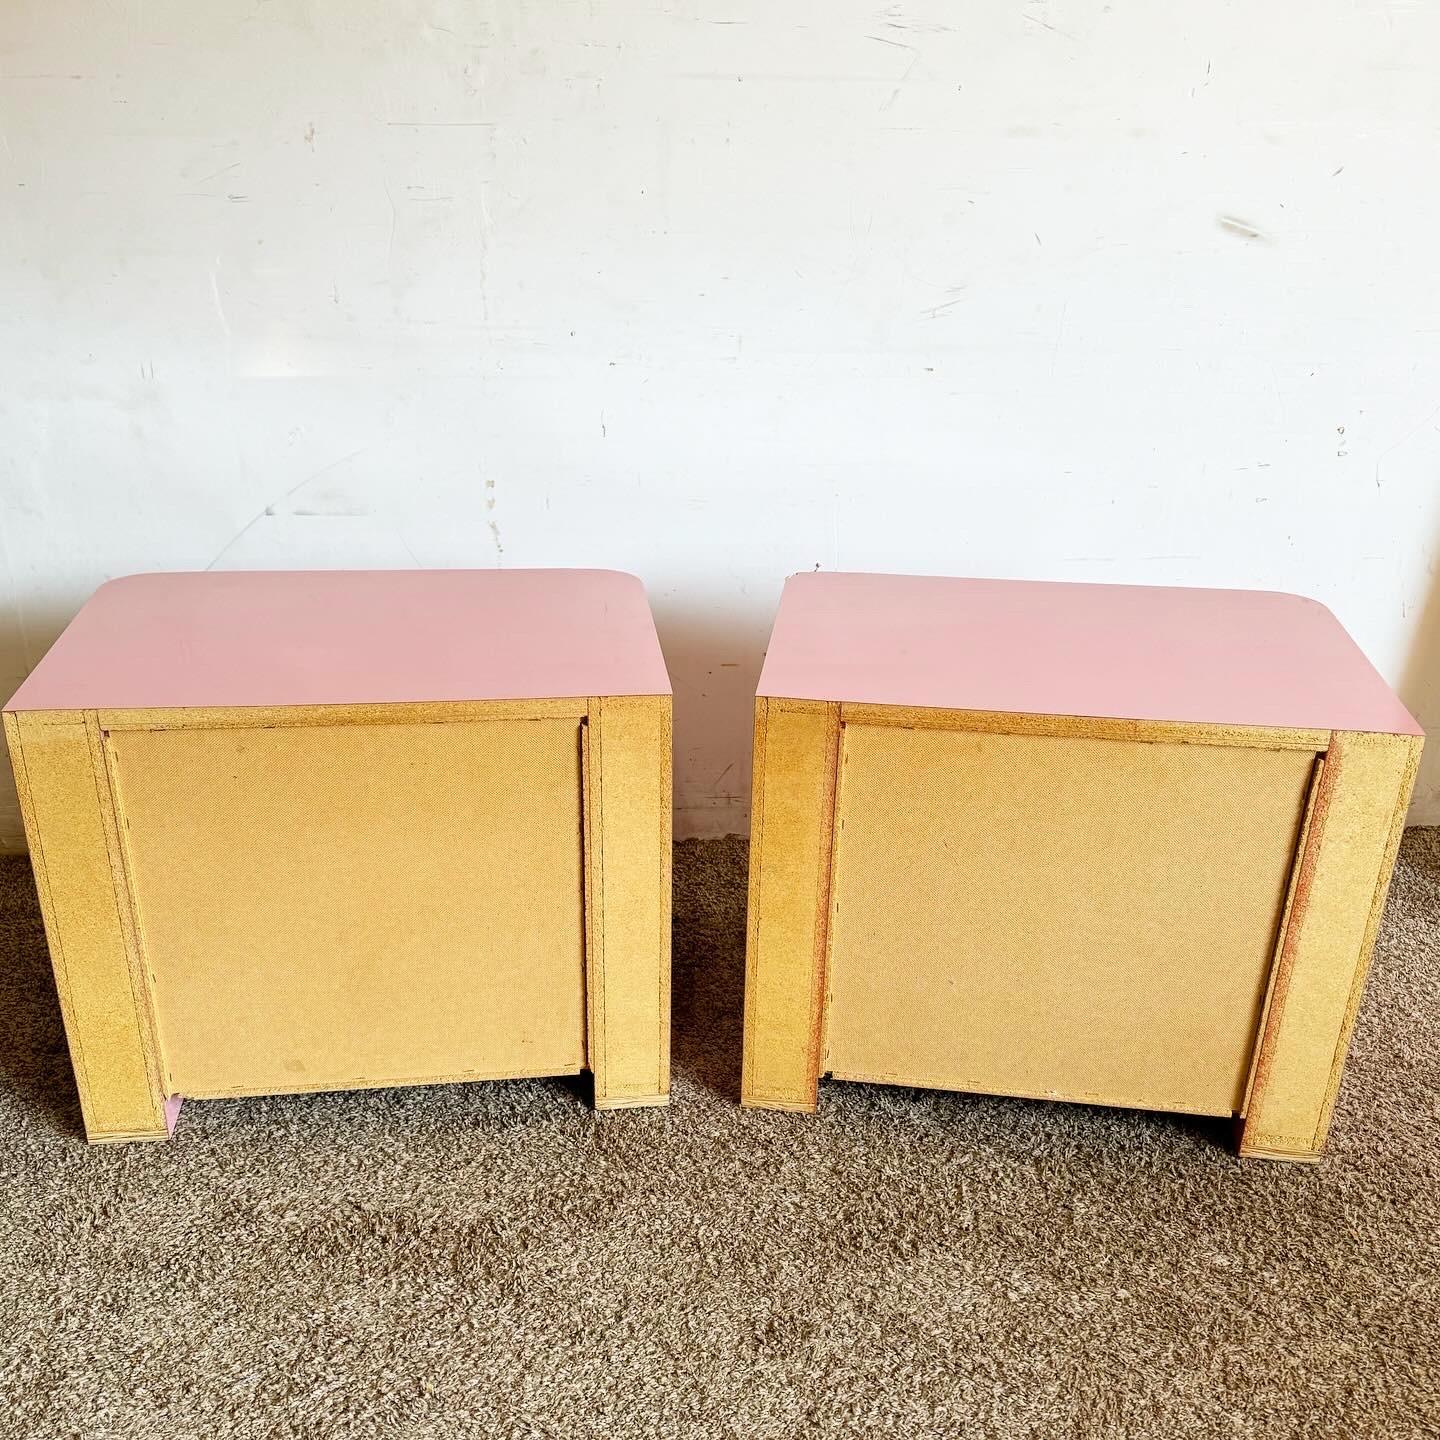 American Postmodern Pink Lacquer Laminate Nightstands With Chrome Handles - a Pair For Sale